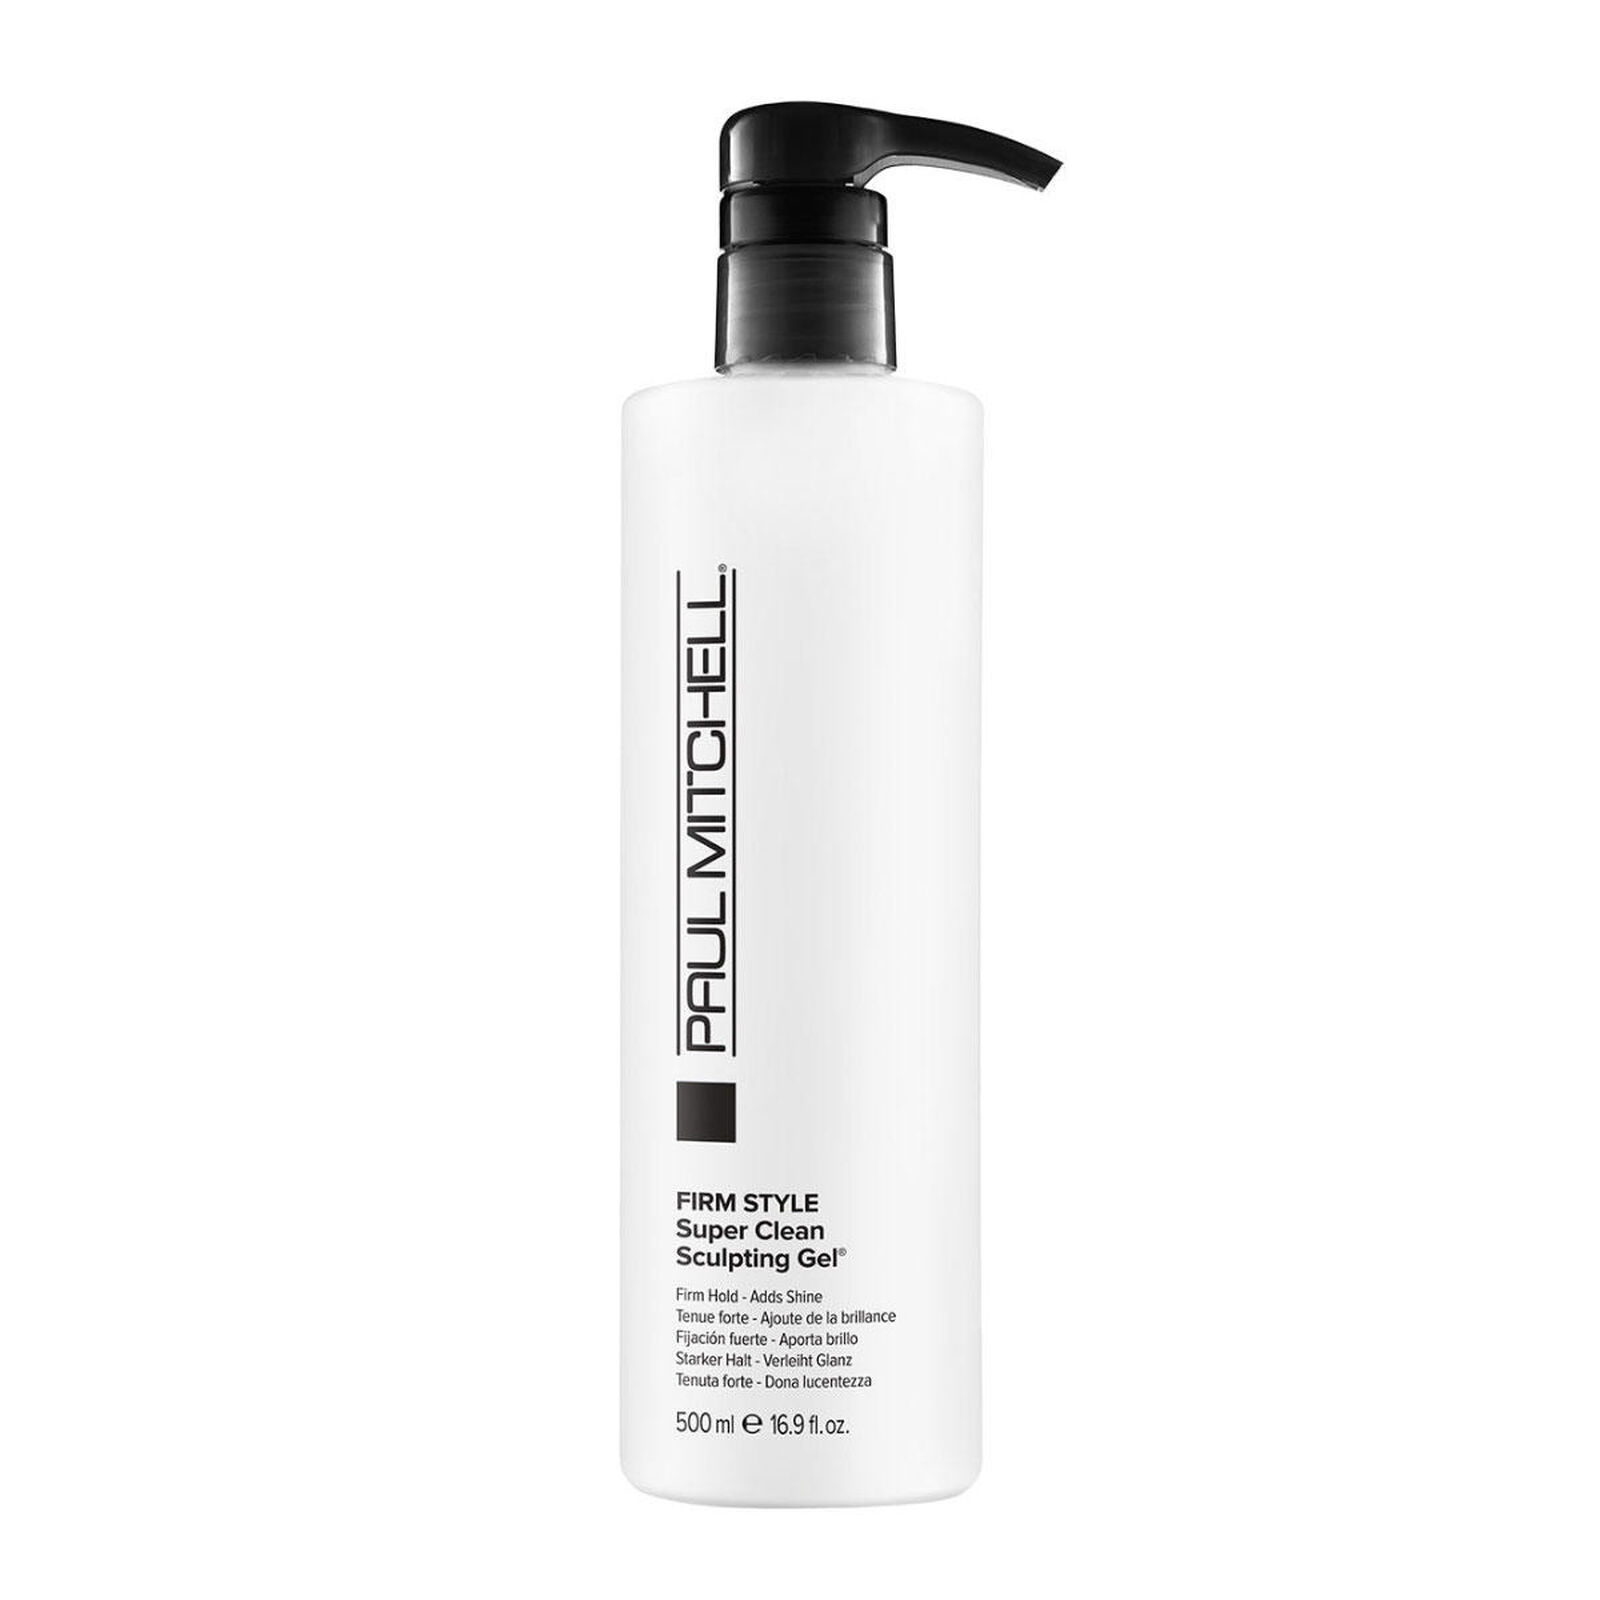 Paul Mitchell Gel pro maximální fixaci Firm Style (Super Clean Sculpting Gel) 100 ml